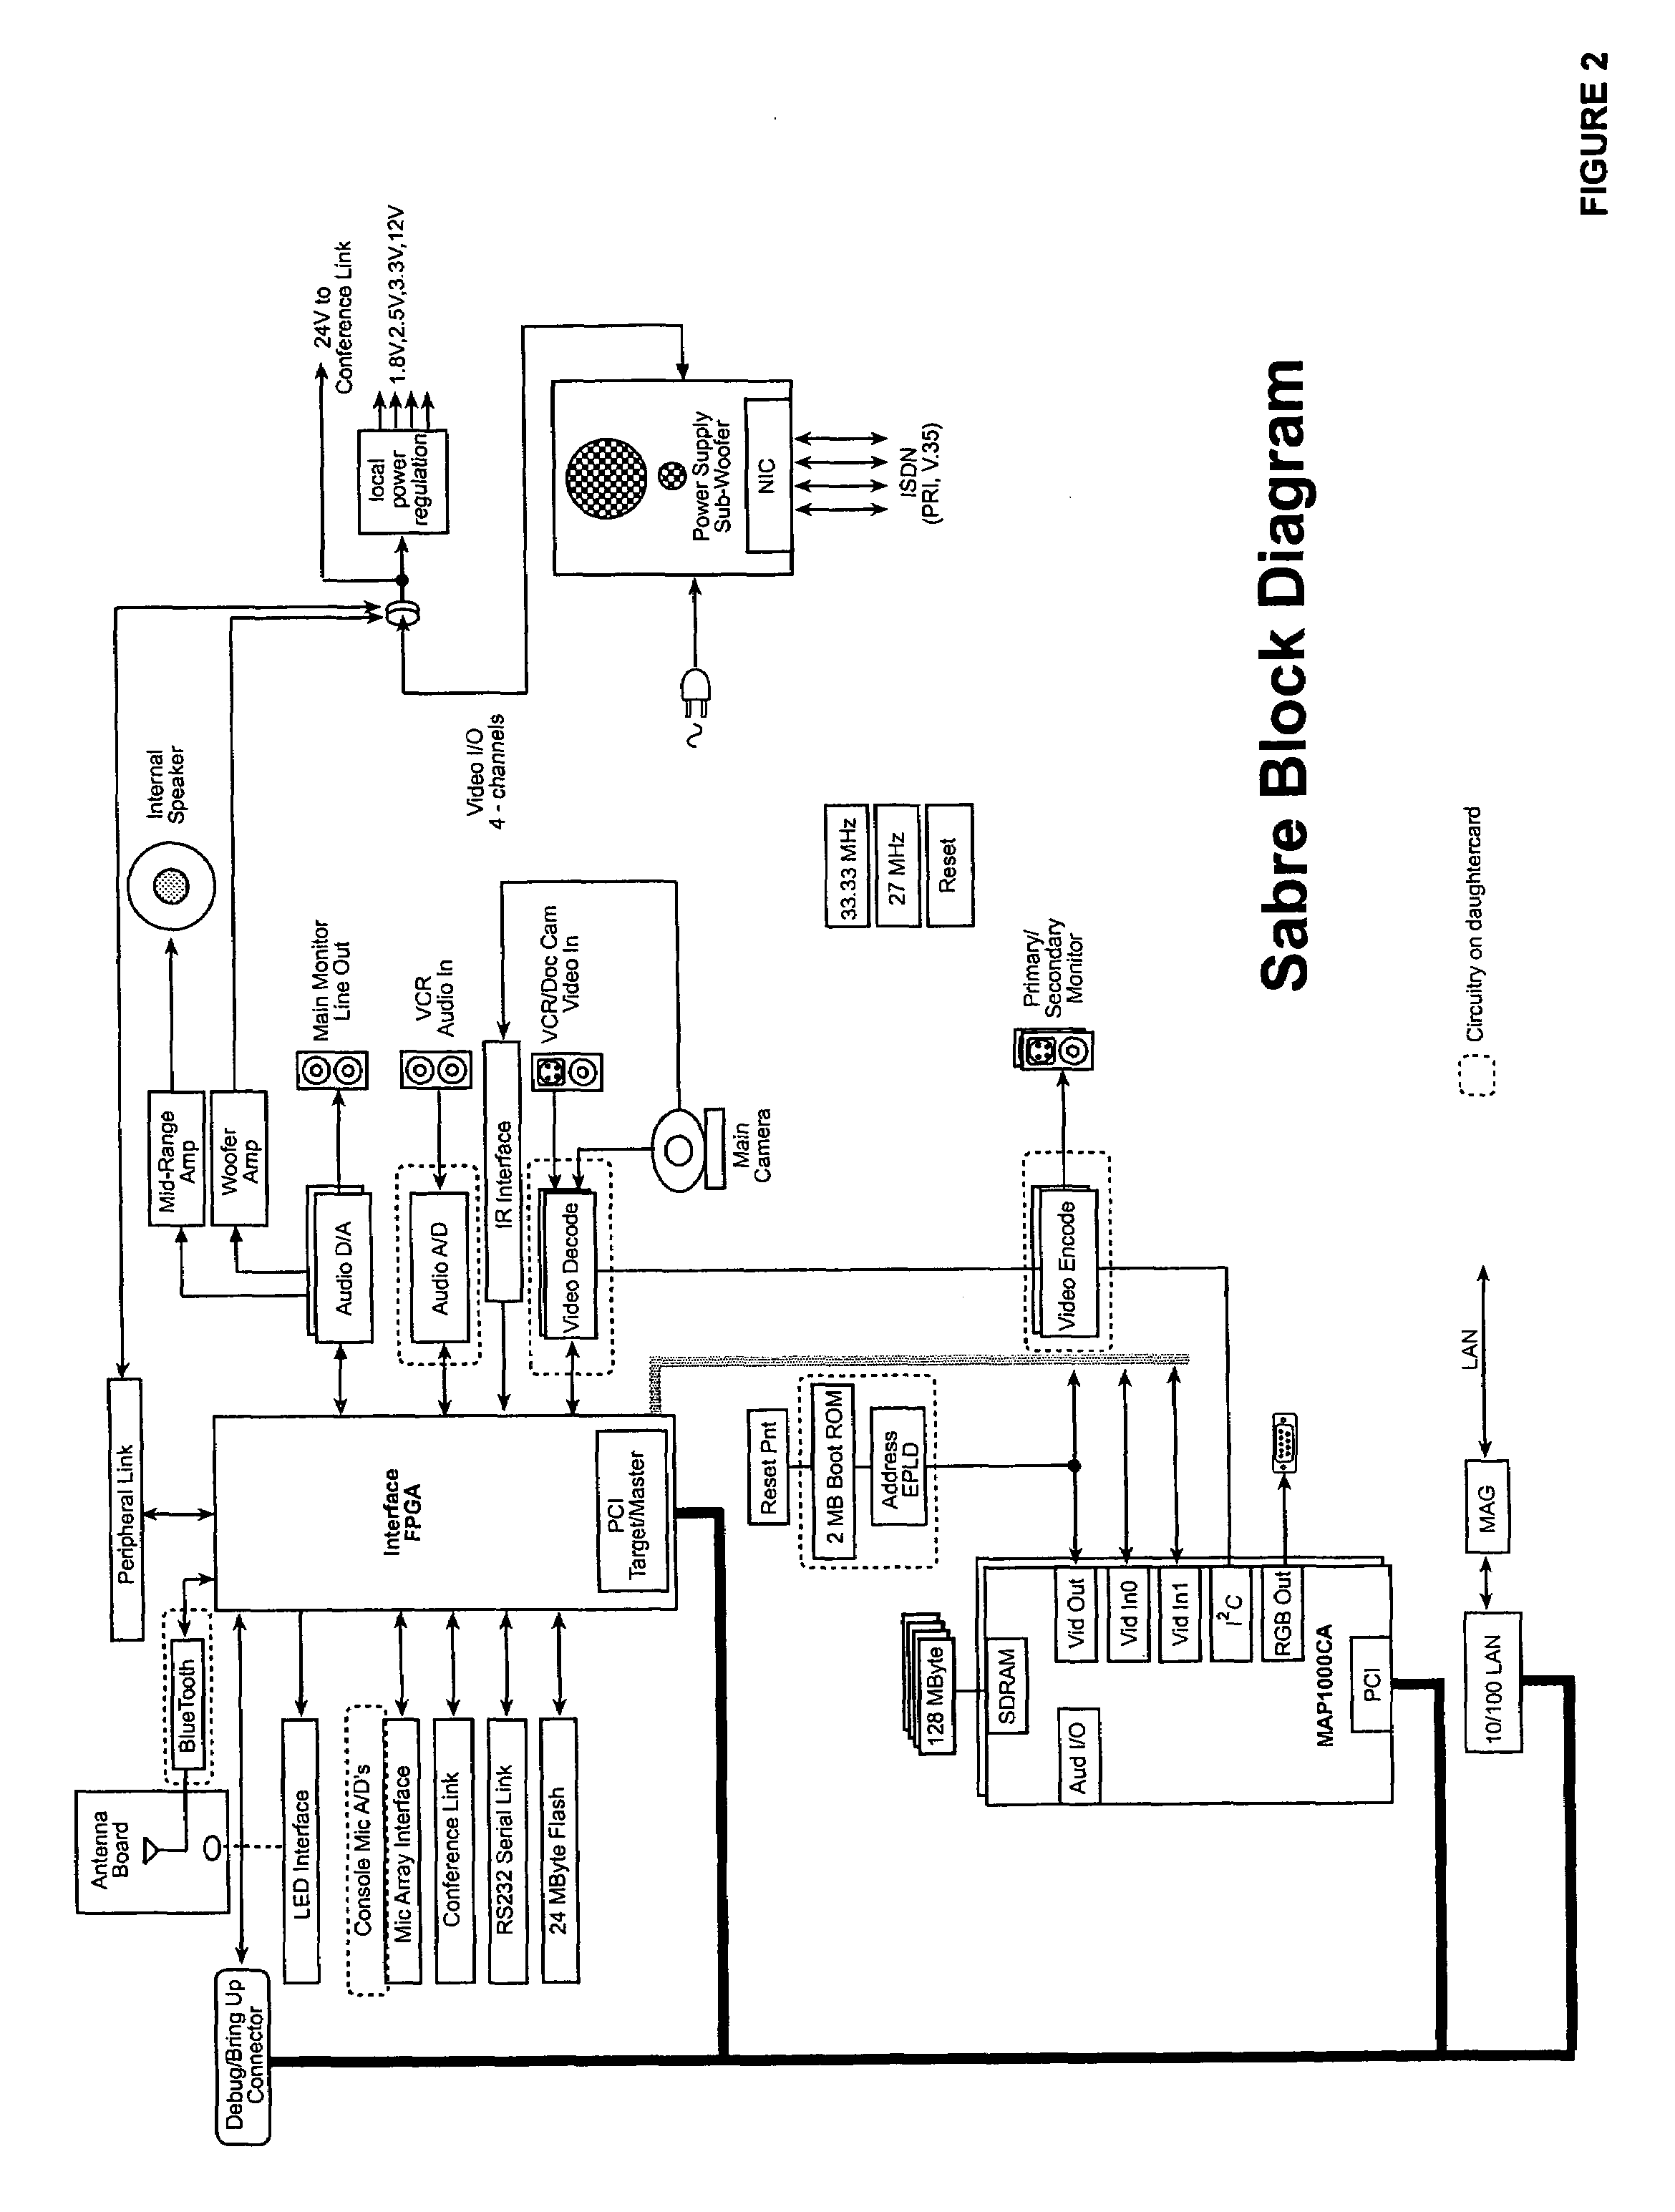 Method and apparatus for videoconference interaction with bluetooth-enabled cellular telephone